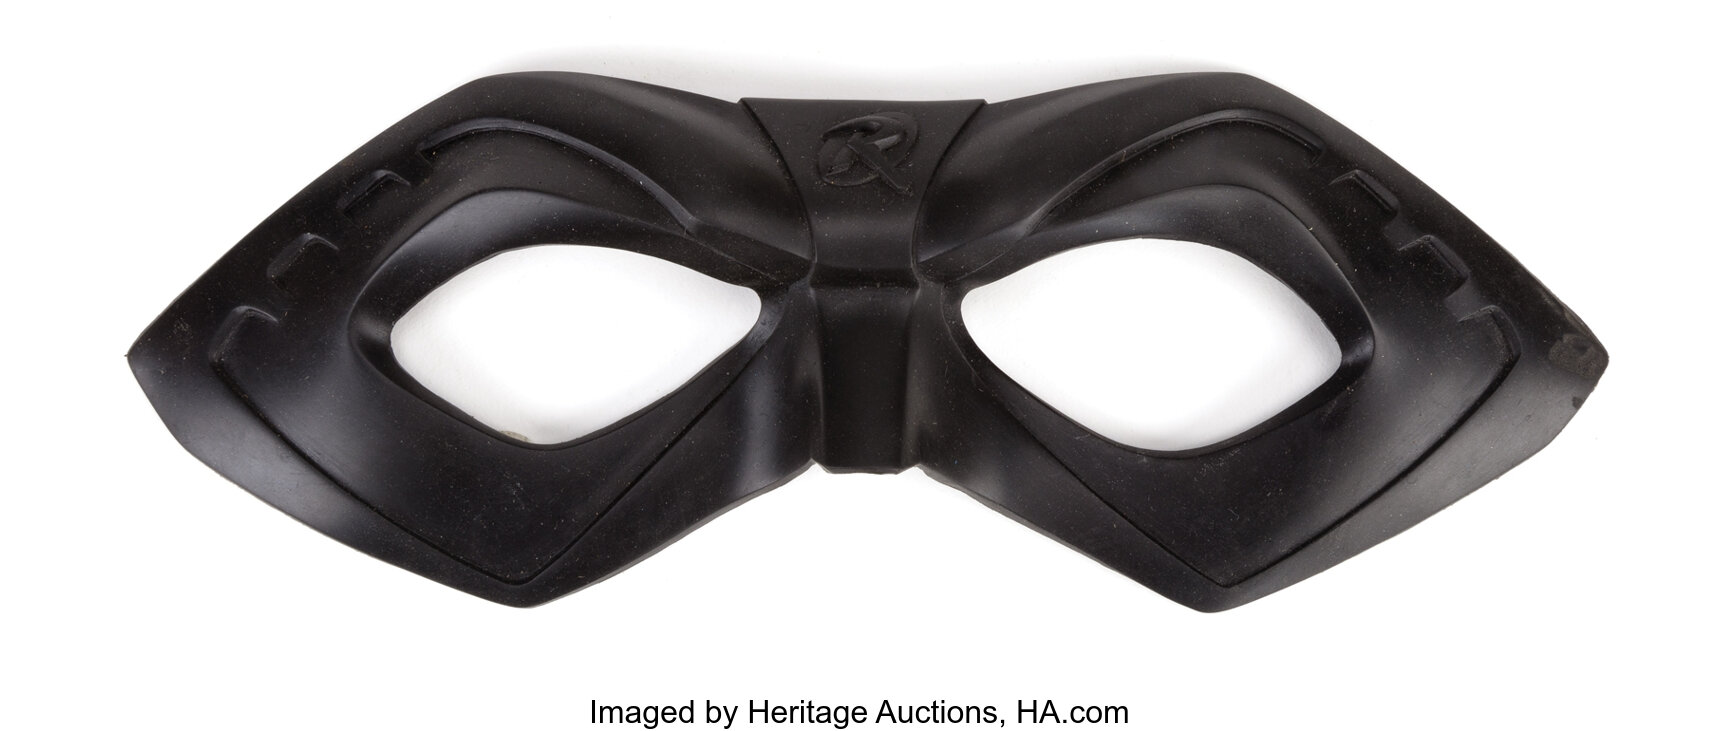 Chris O'Donnell "Robin" mask from Batman Forever. ... Movie/TV | Lot #2452 | Auctions